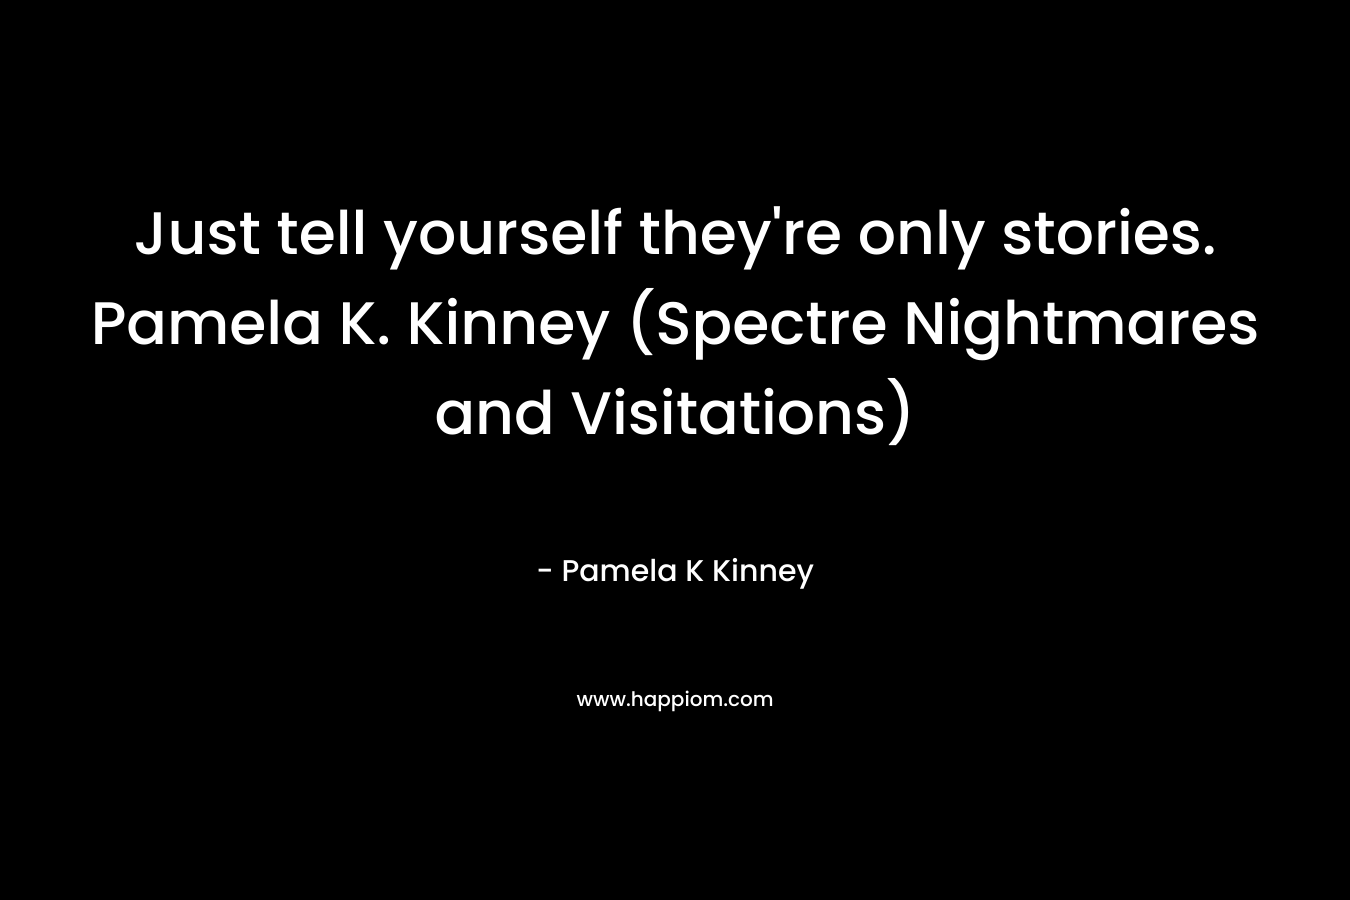 Just tell yourself they’re only stories. Pamela K. Kinney (Spectre Nightmares and Visitations) – Pamela K Kinney